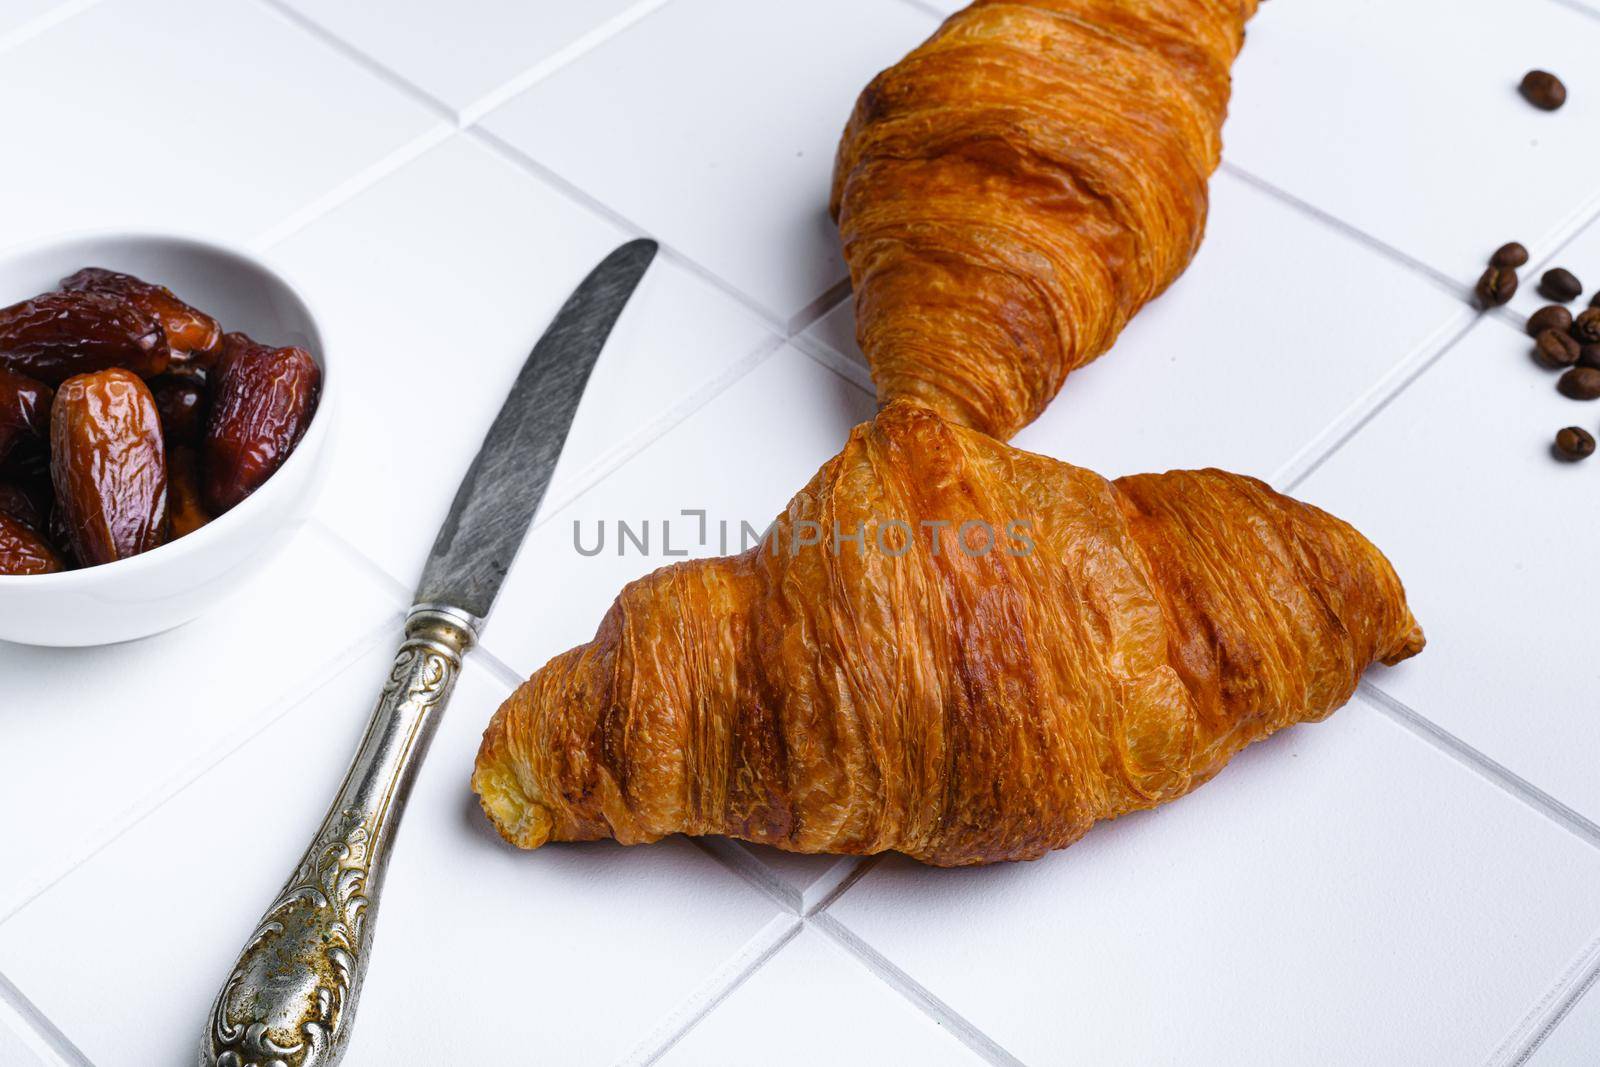 Warm butter creamy baked croissants set, on white ceramic squared tile table background by Ilianesolenyi